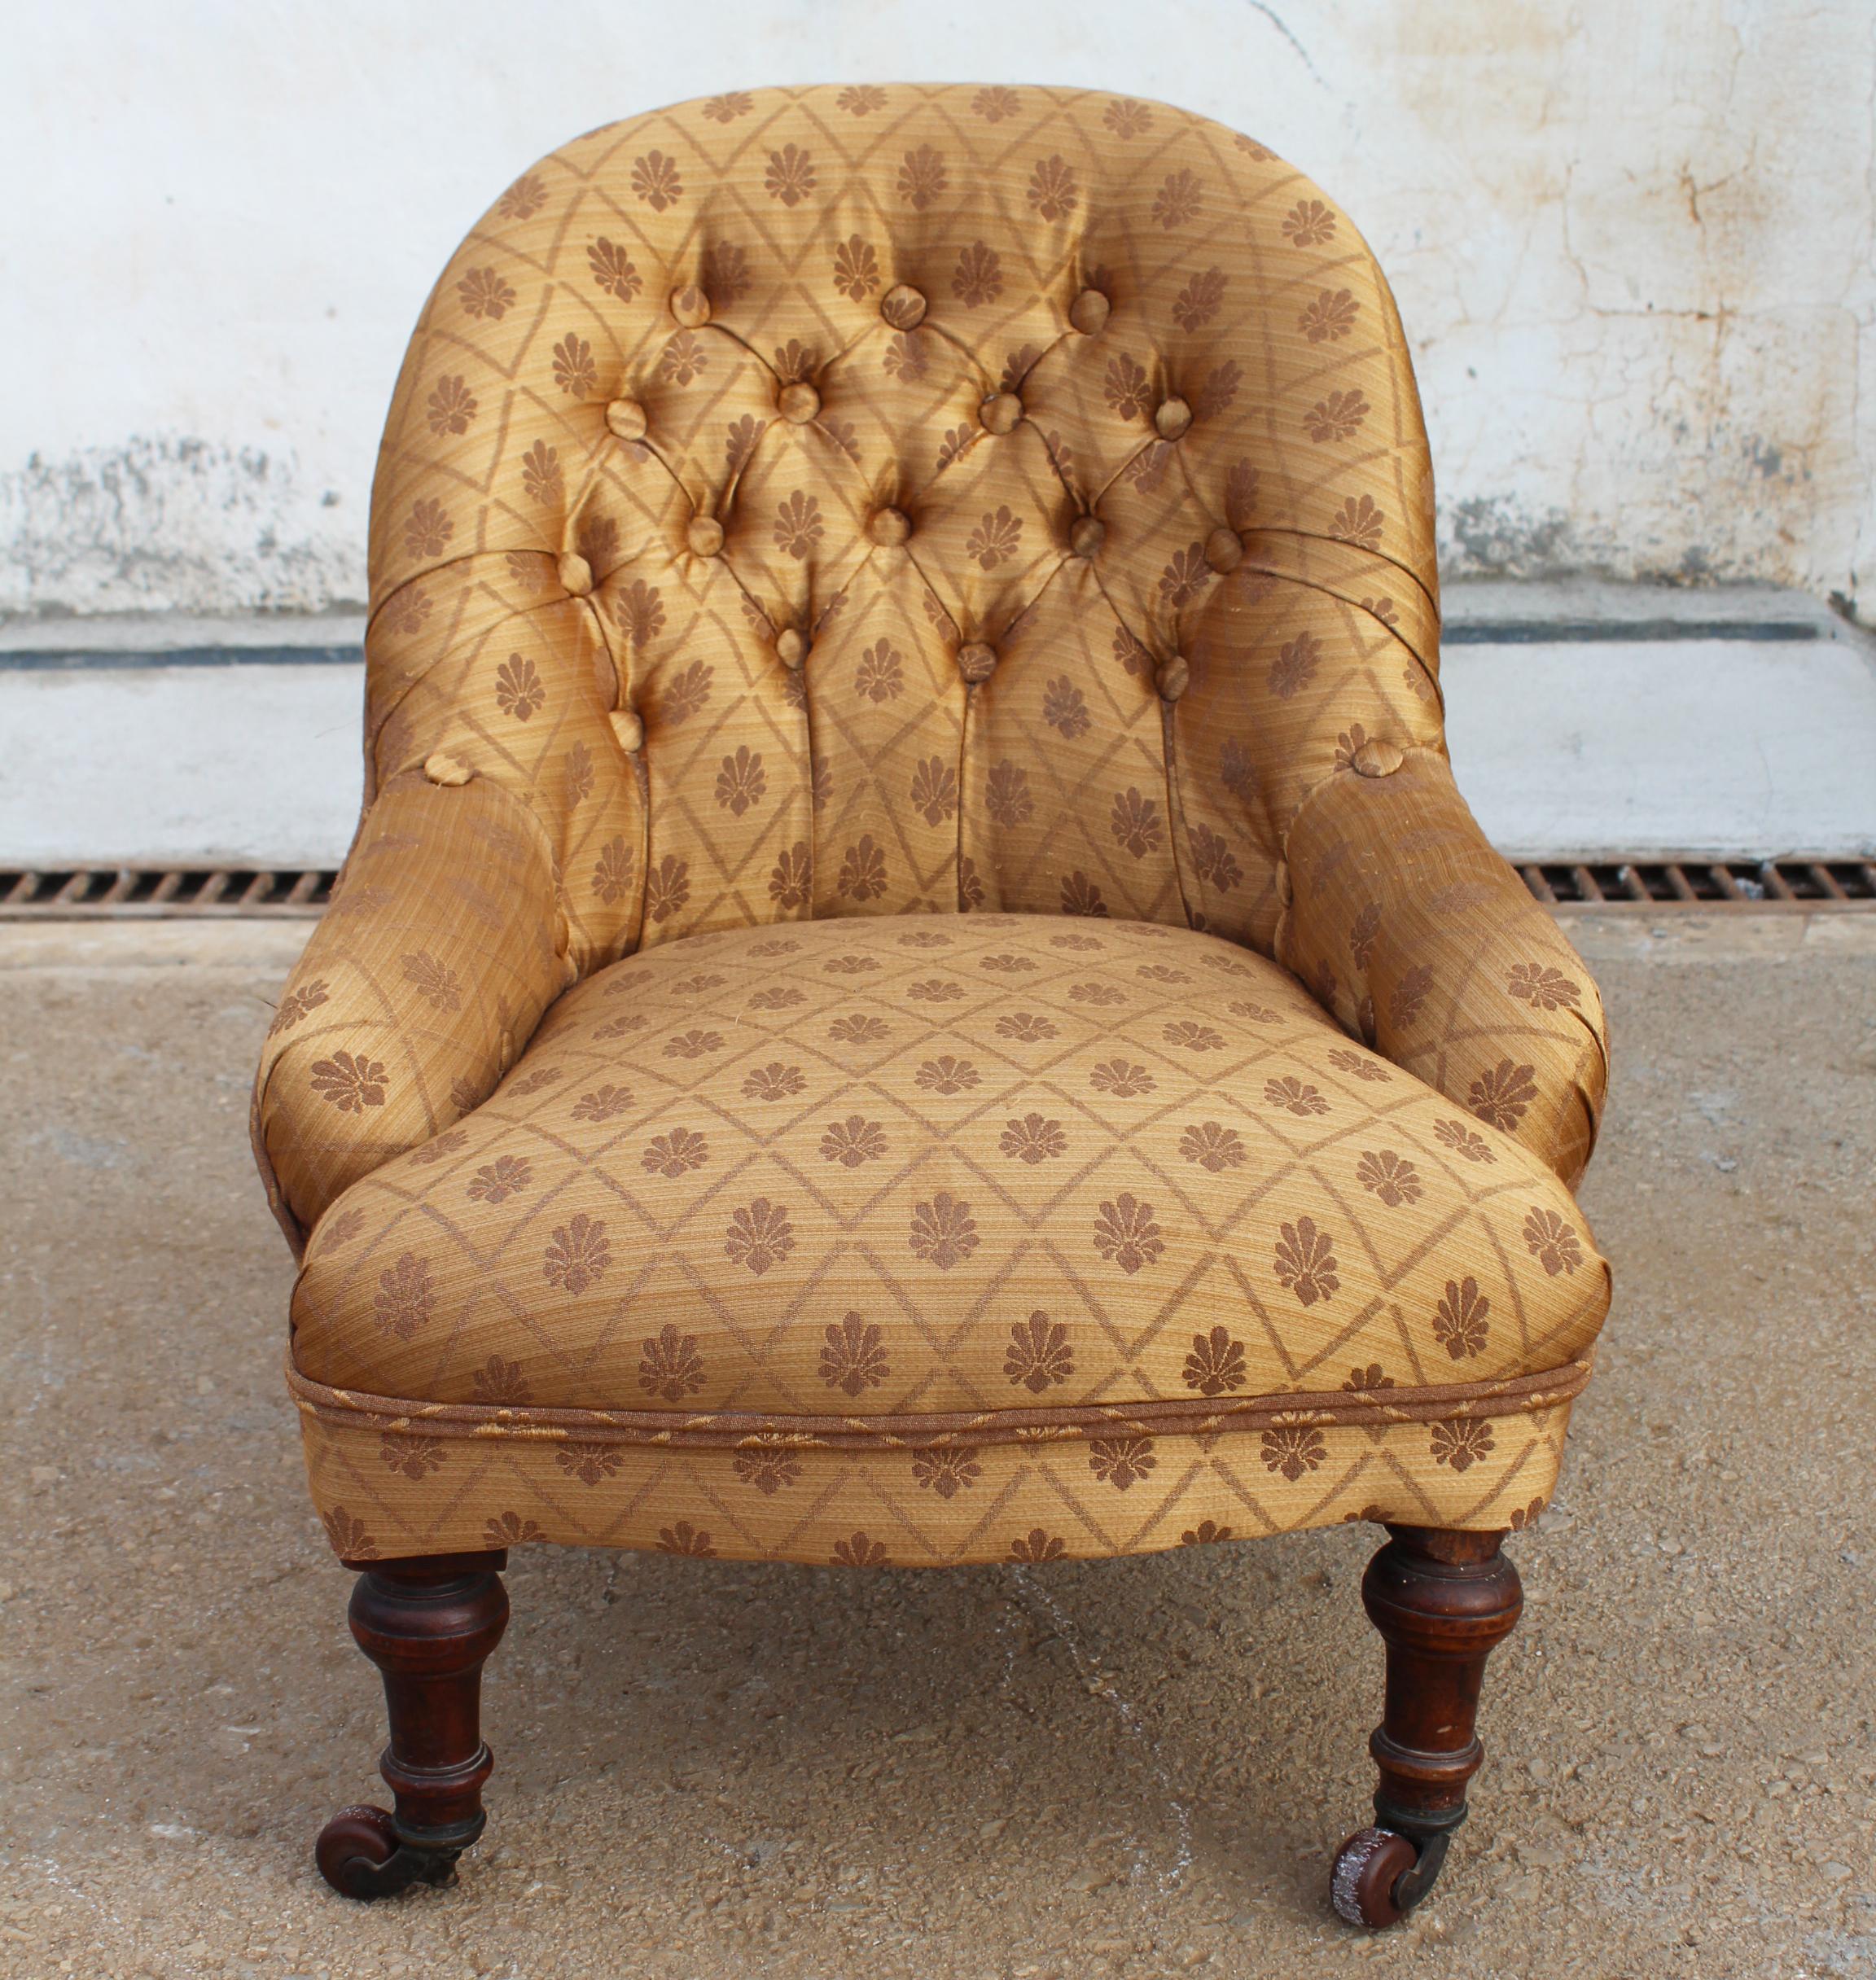 19th Century English Children's Chair with Mahogany Legs and Silk Upholstery For Sale 7